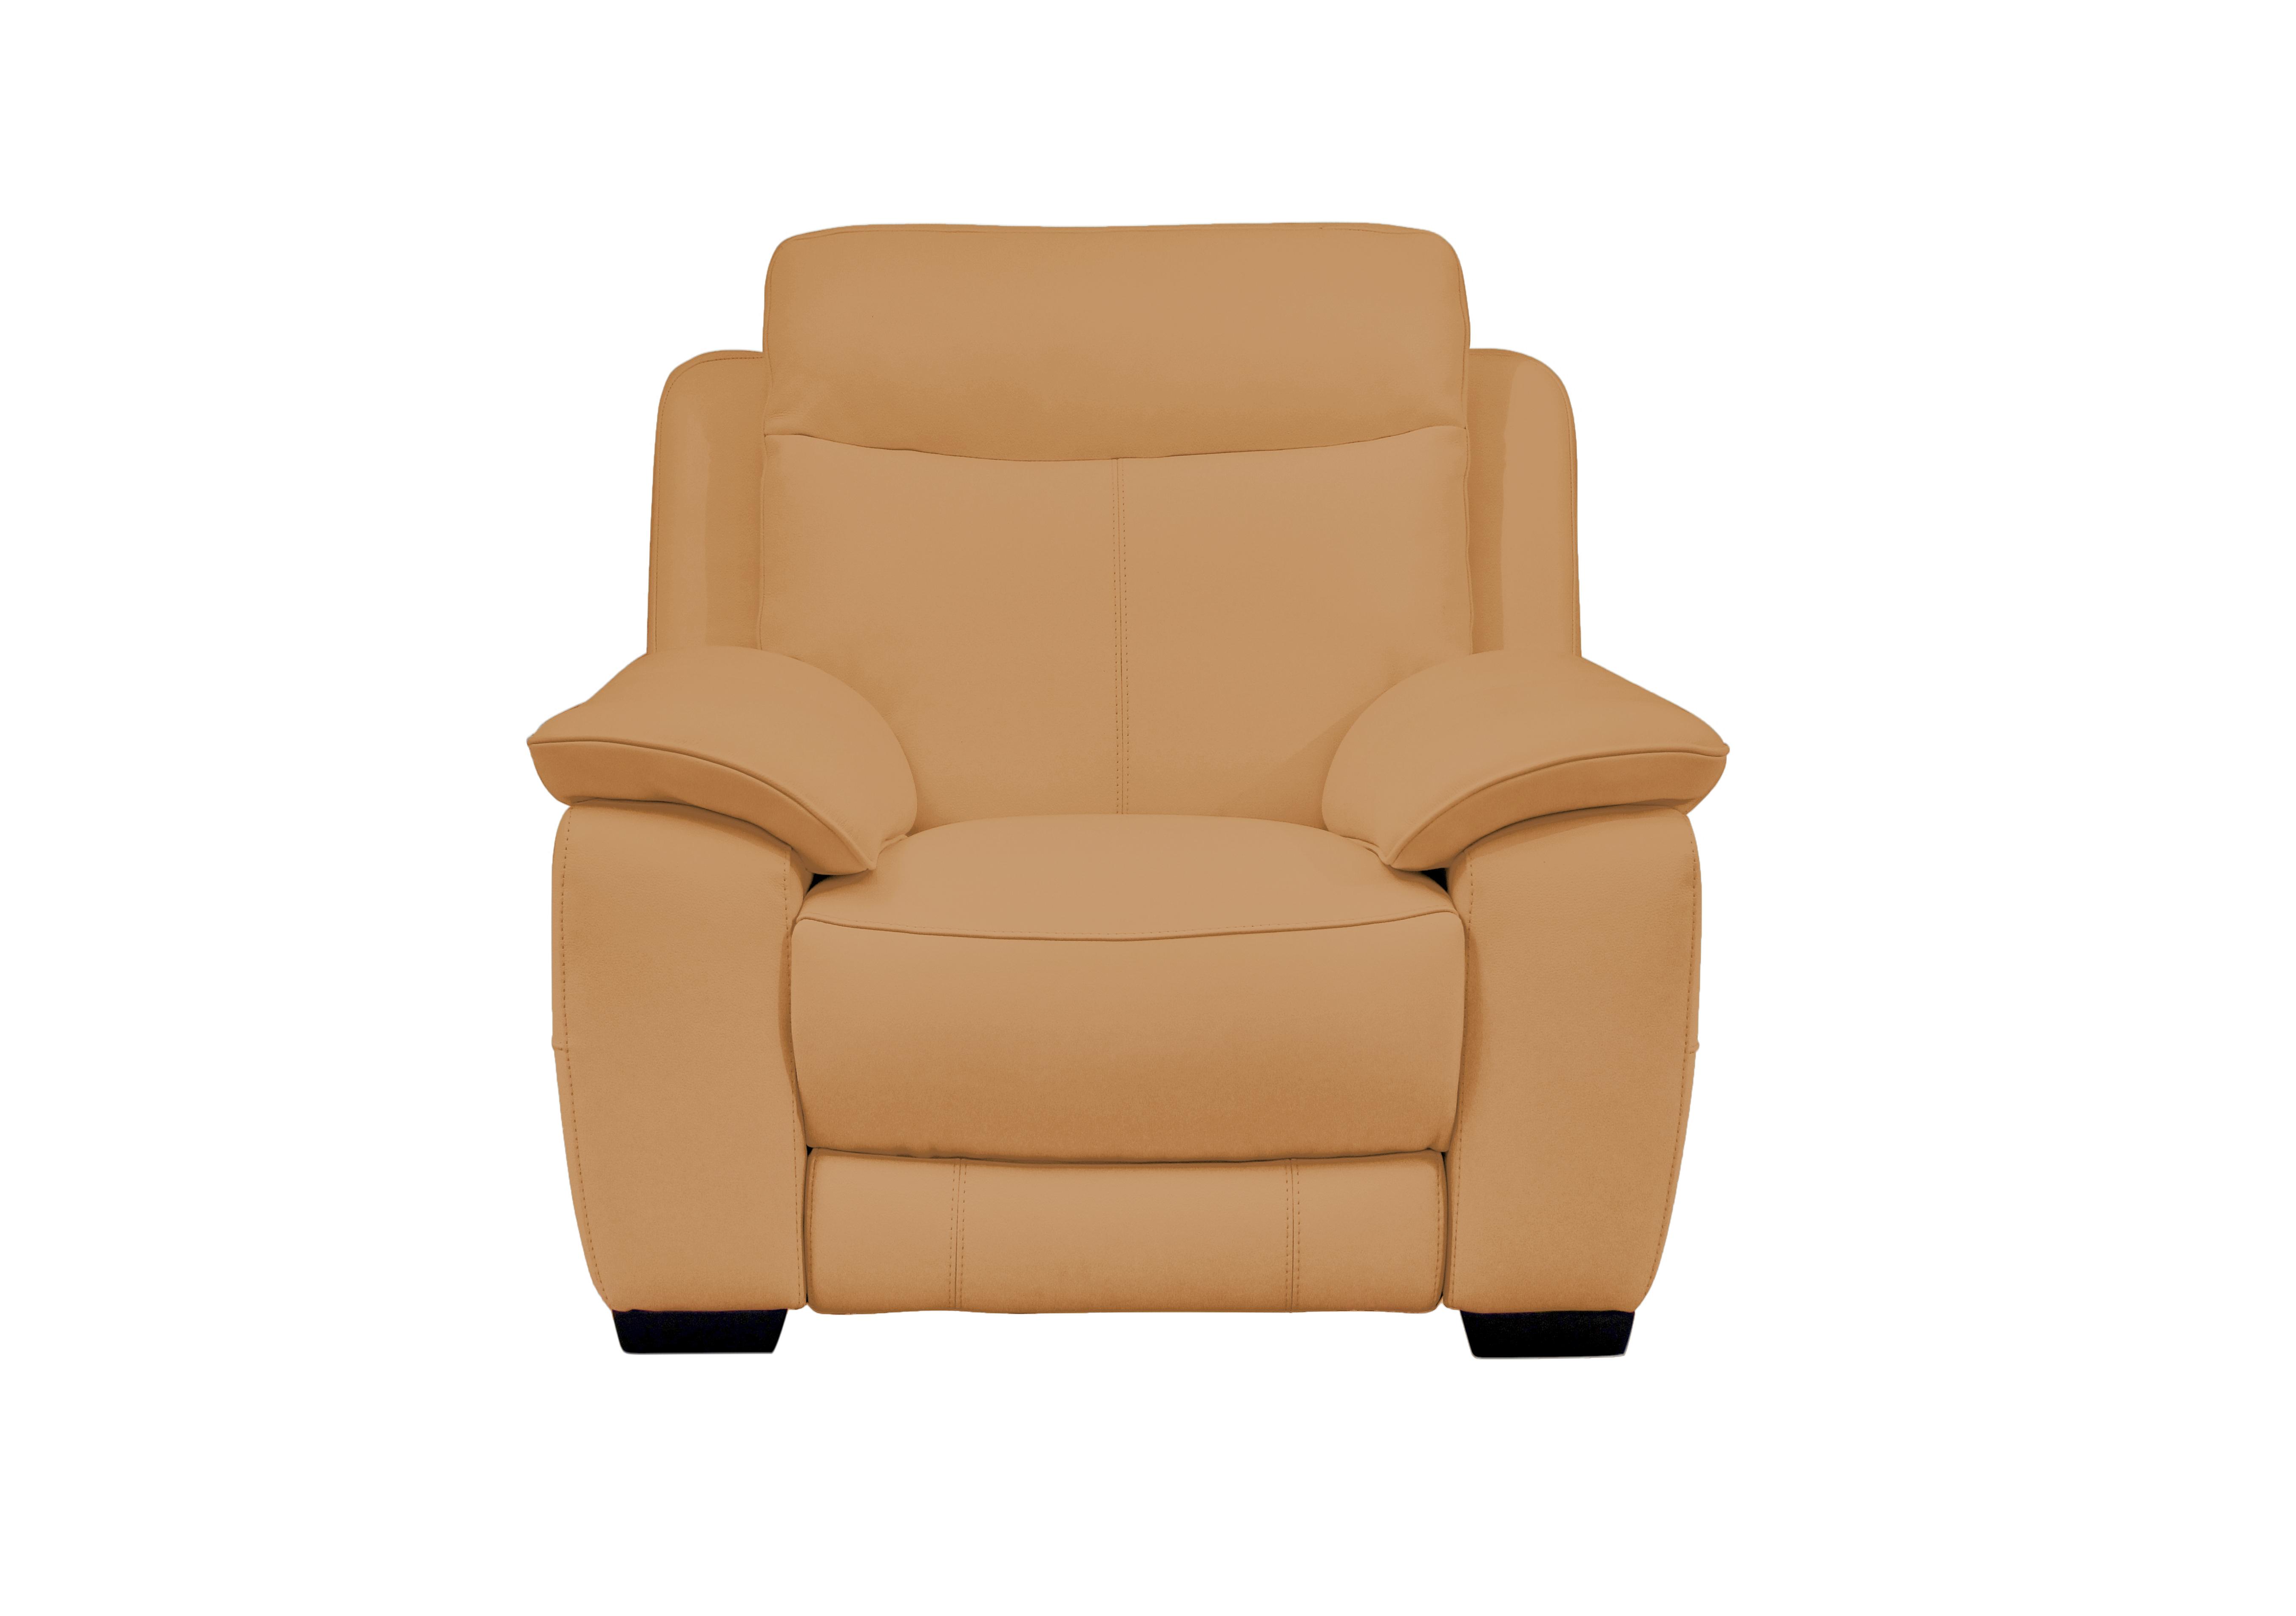 Starlight Express Leather Power Armchair with Power Headrest in Nc-335e Honey Yellow on Furniture Village